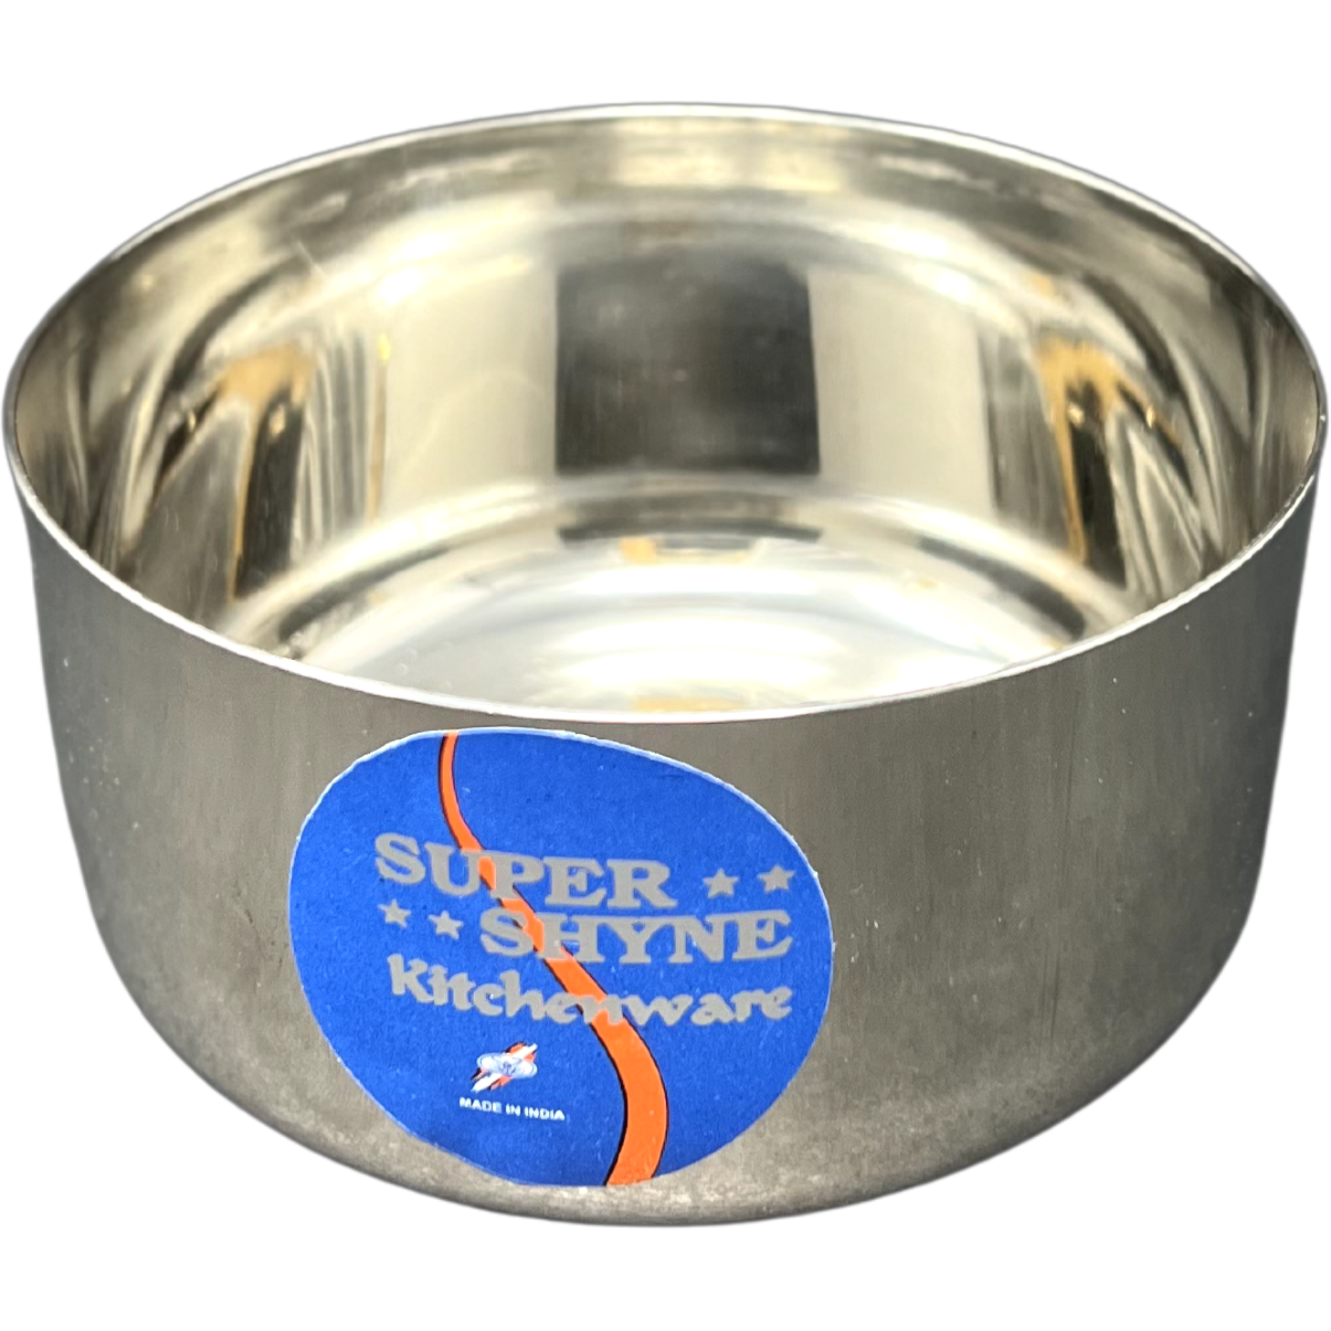 Case of 12 - Super Shyne Stainless Steel Bowl Oval